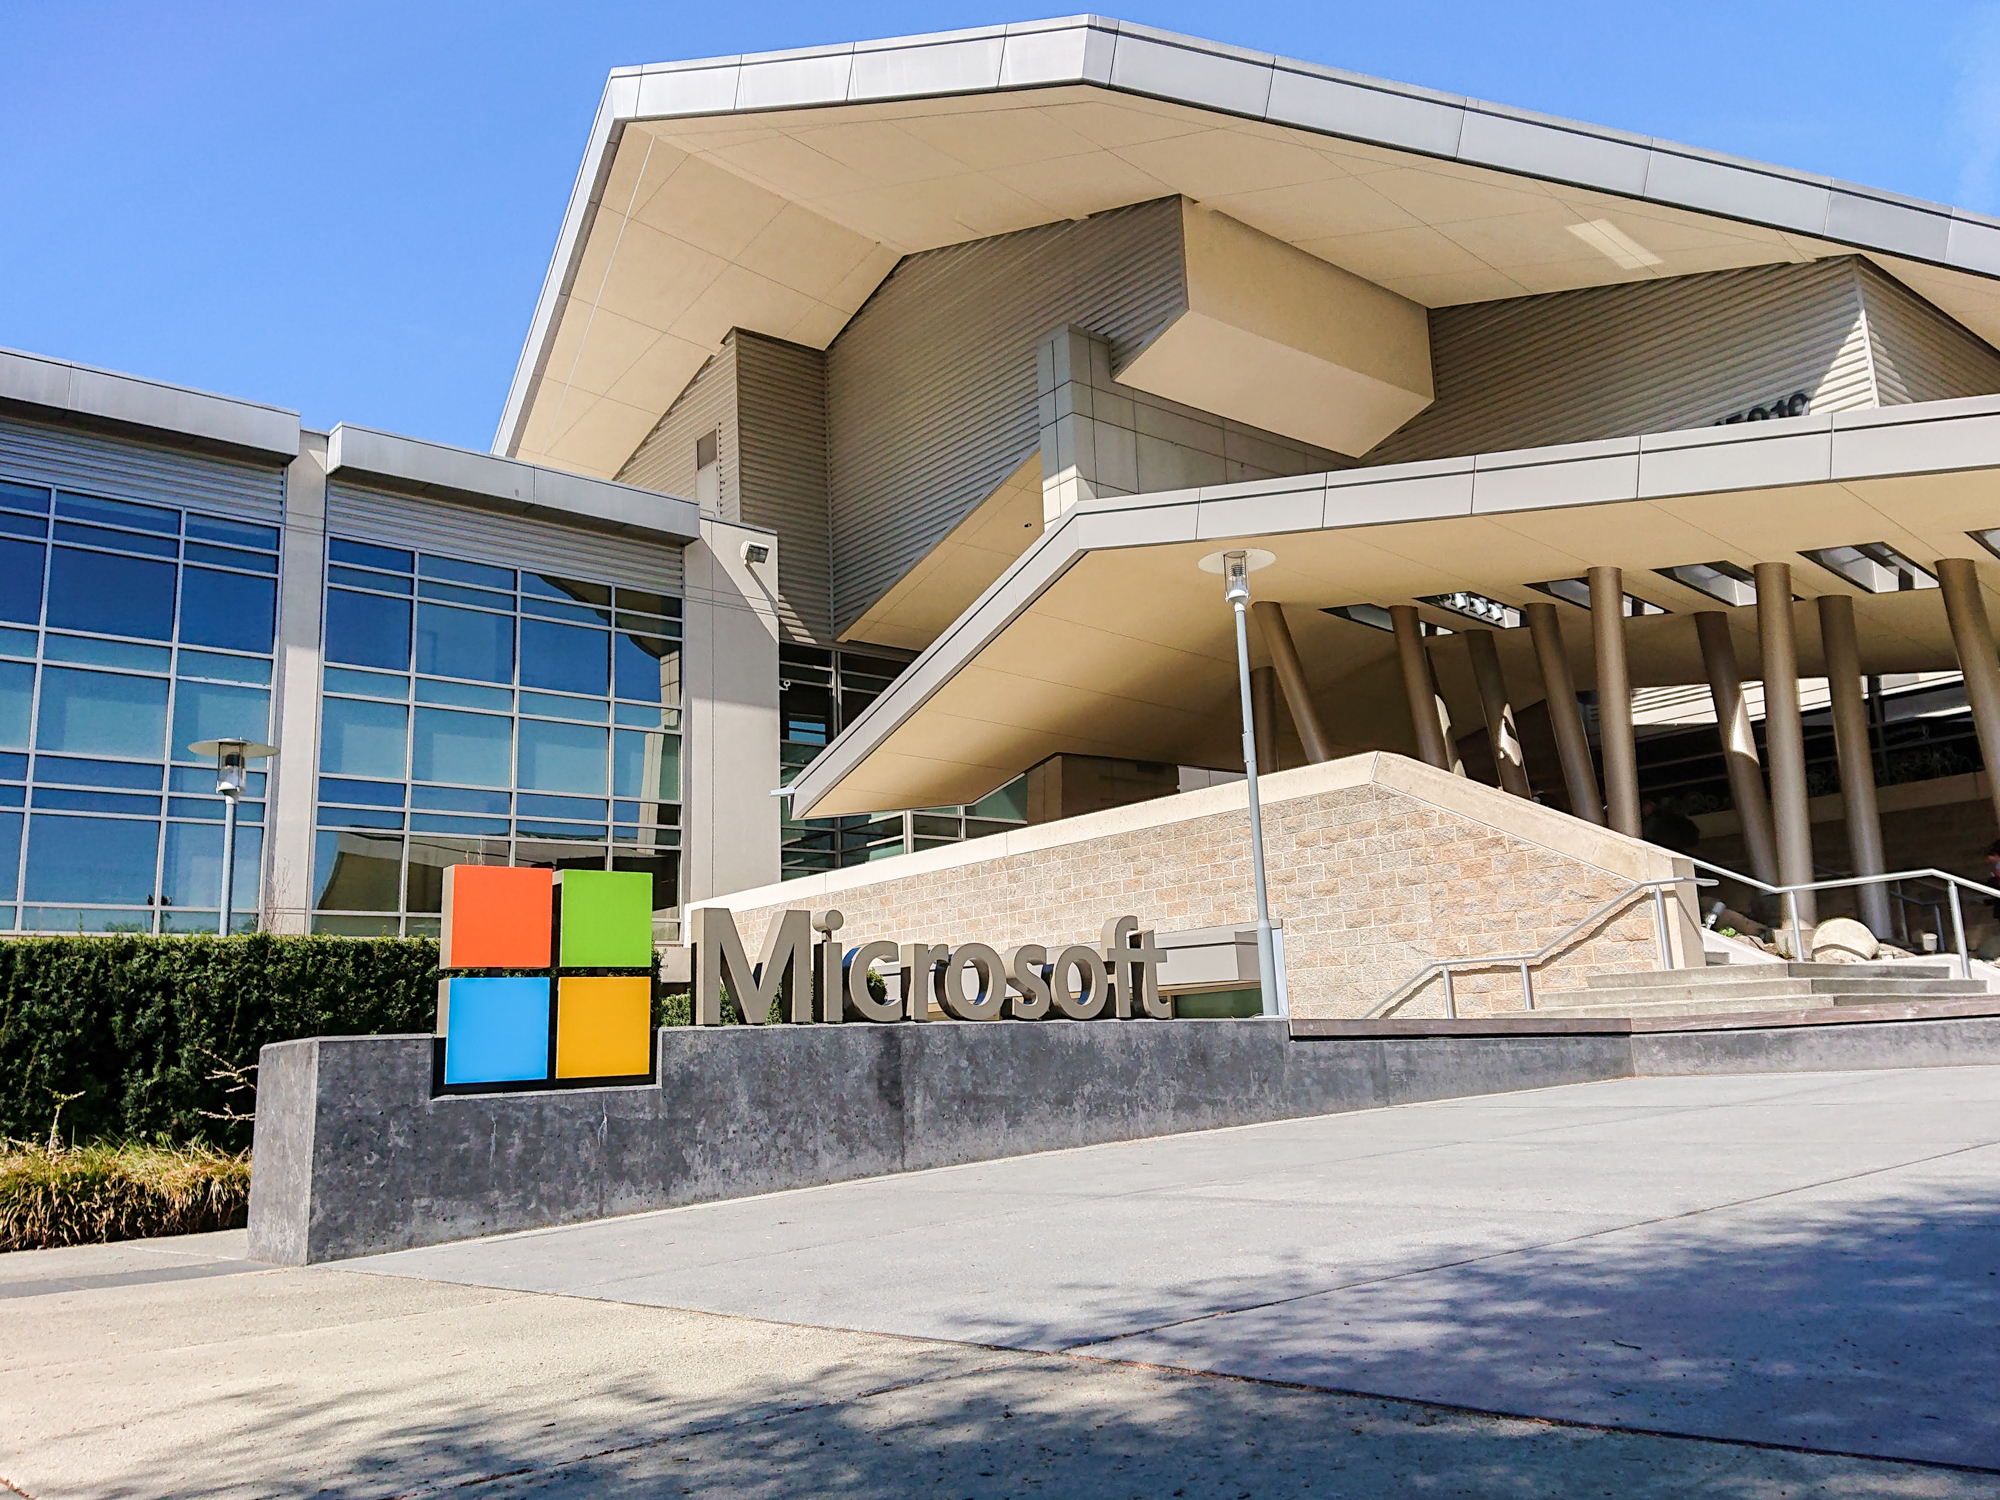 Microsoft Campus - this is what Redmond looks like